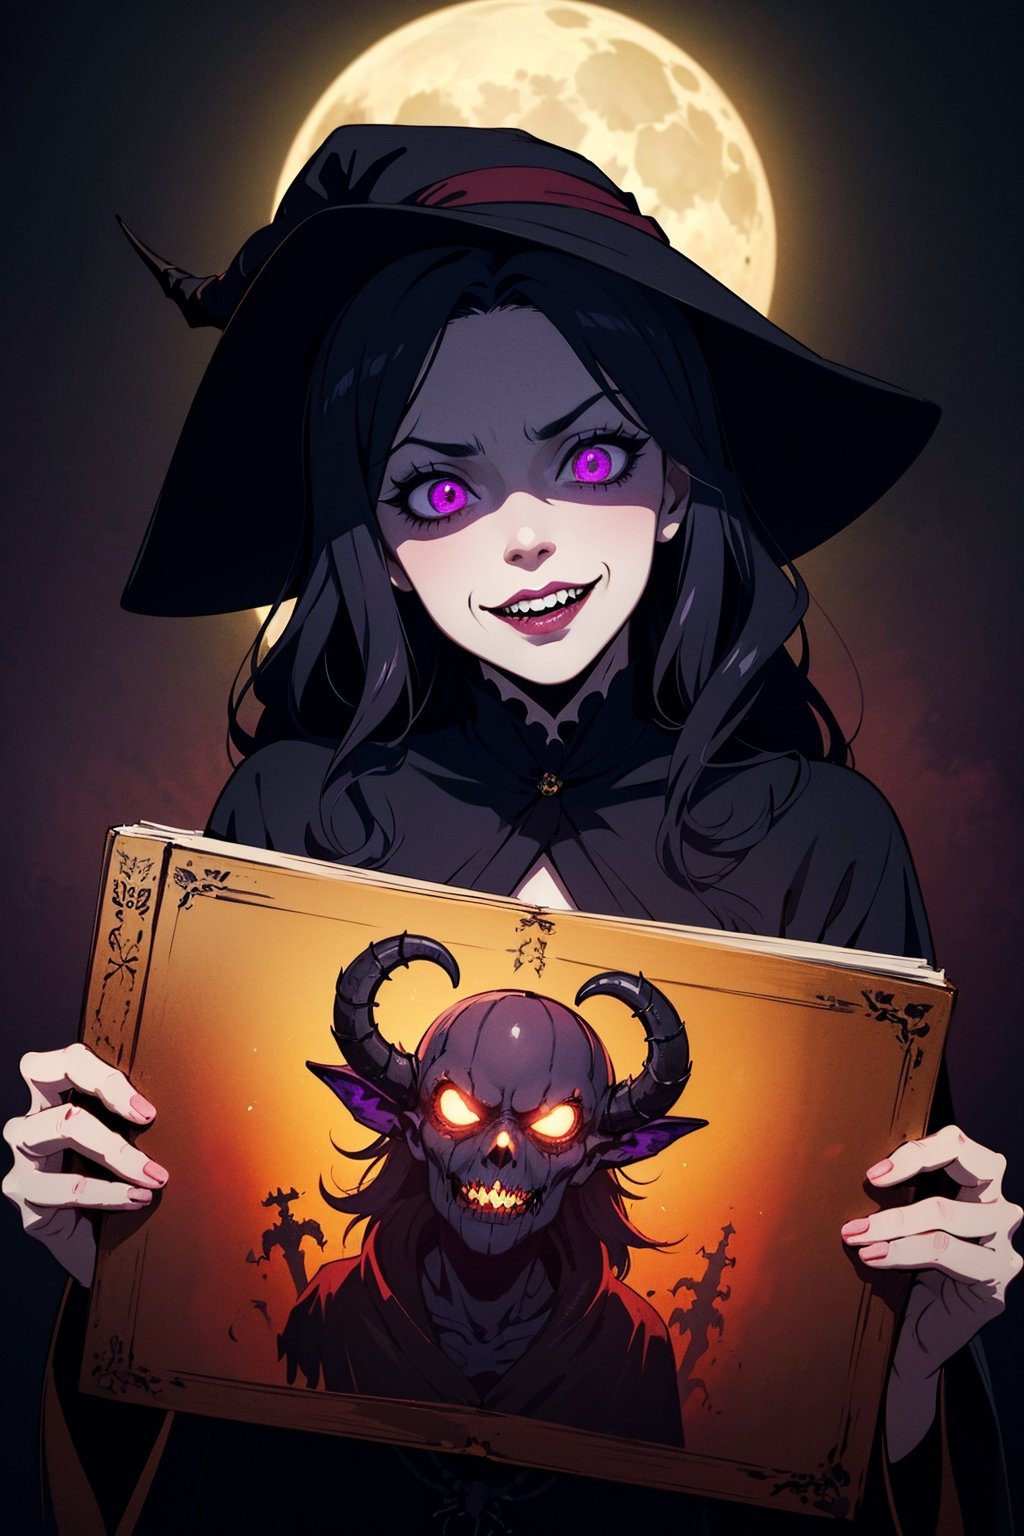 (best quality,4k,8k,highres,masterpiece:1.2),ultra-detailed,(realistic,photorealistic,photo-realistic:1.37),creepy,spooky,halloween theme,anime girl,halloween makeup,detailed eyes,detailed lips,long eyelashes,wavy black hair,evil smile,bloody red lipstick,gloomy atmosphere,haunted background,glowing pumpkin,witch hat,black robe,eerie lighting,horror anime style,dark purple color palette,ghostly aura,scary expression,menacing grin,sinister vibe,gothic aesthetic,witchcraft,witchy vibes,cobwebs,spellbook,curled horns,witchy cat,full moon,haunted mansion,trick or treat,spider webs,creepy crawlies,nightmare fuel